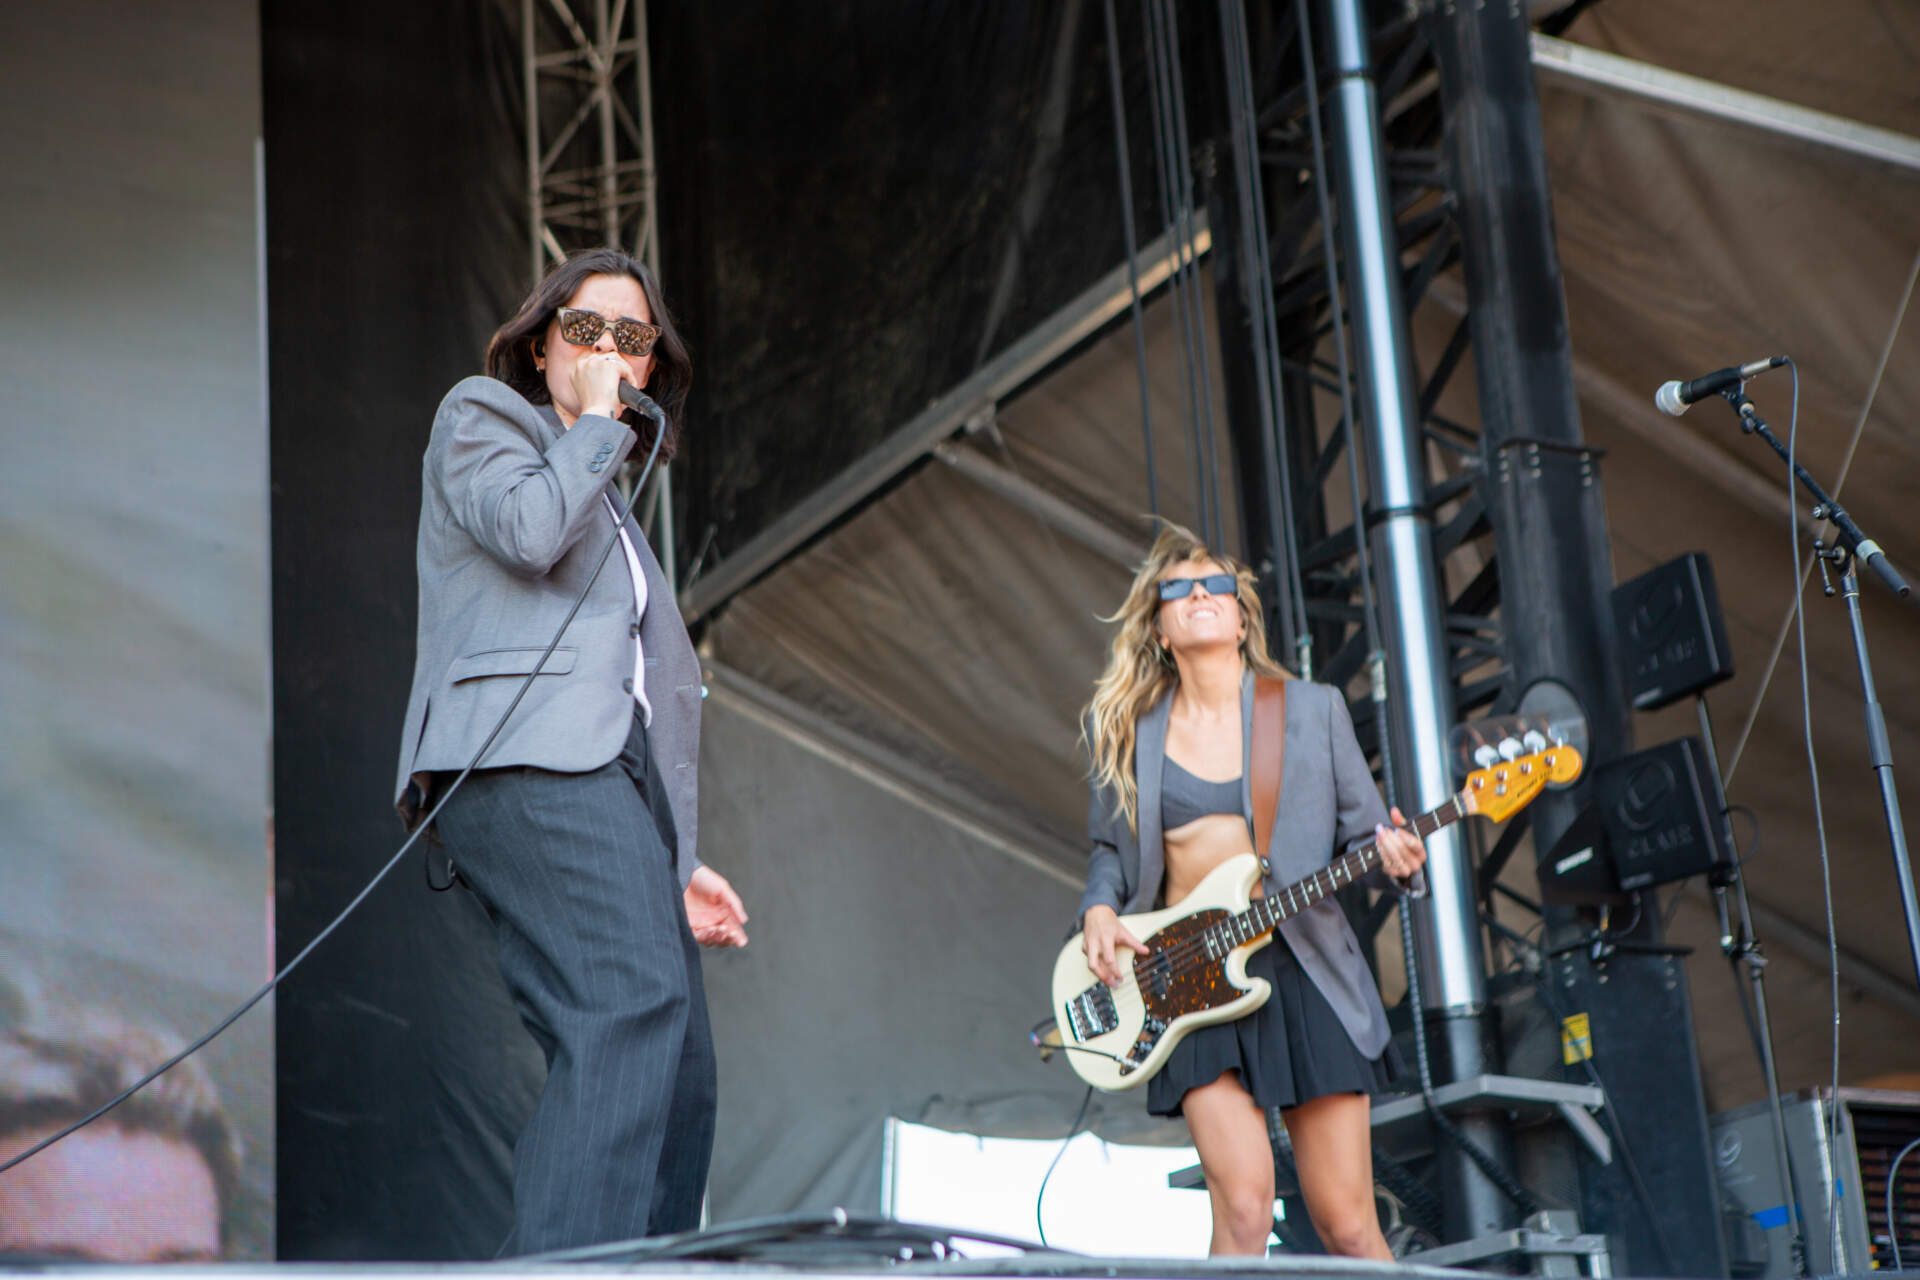 The Aces' Cristal Ramirez (left) and McKenna Petty (right) at Day 2 of Boston Calling (Jacob Garcia/WBUR)